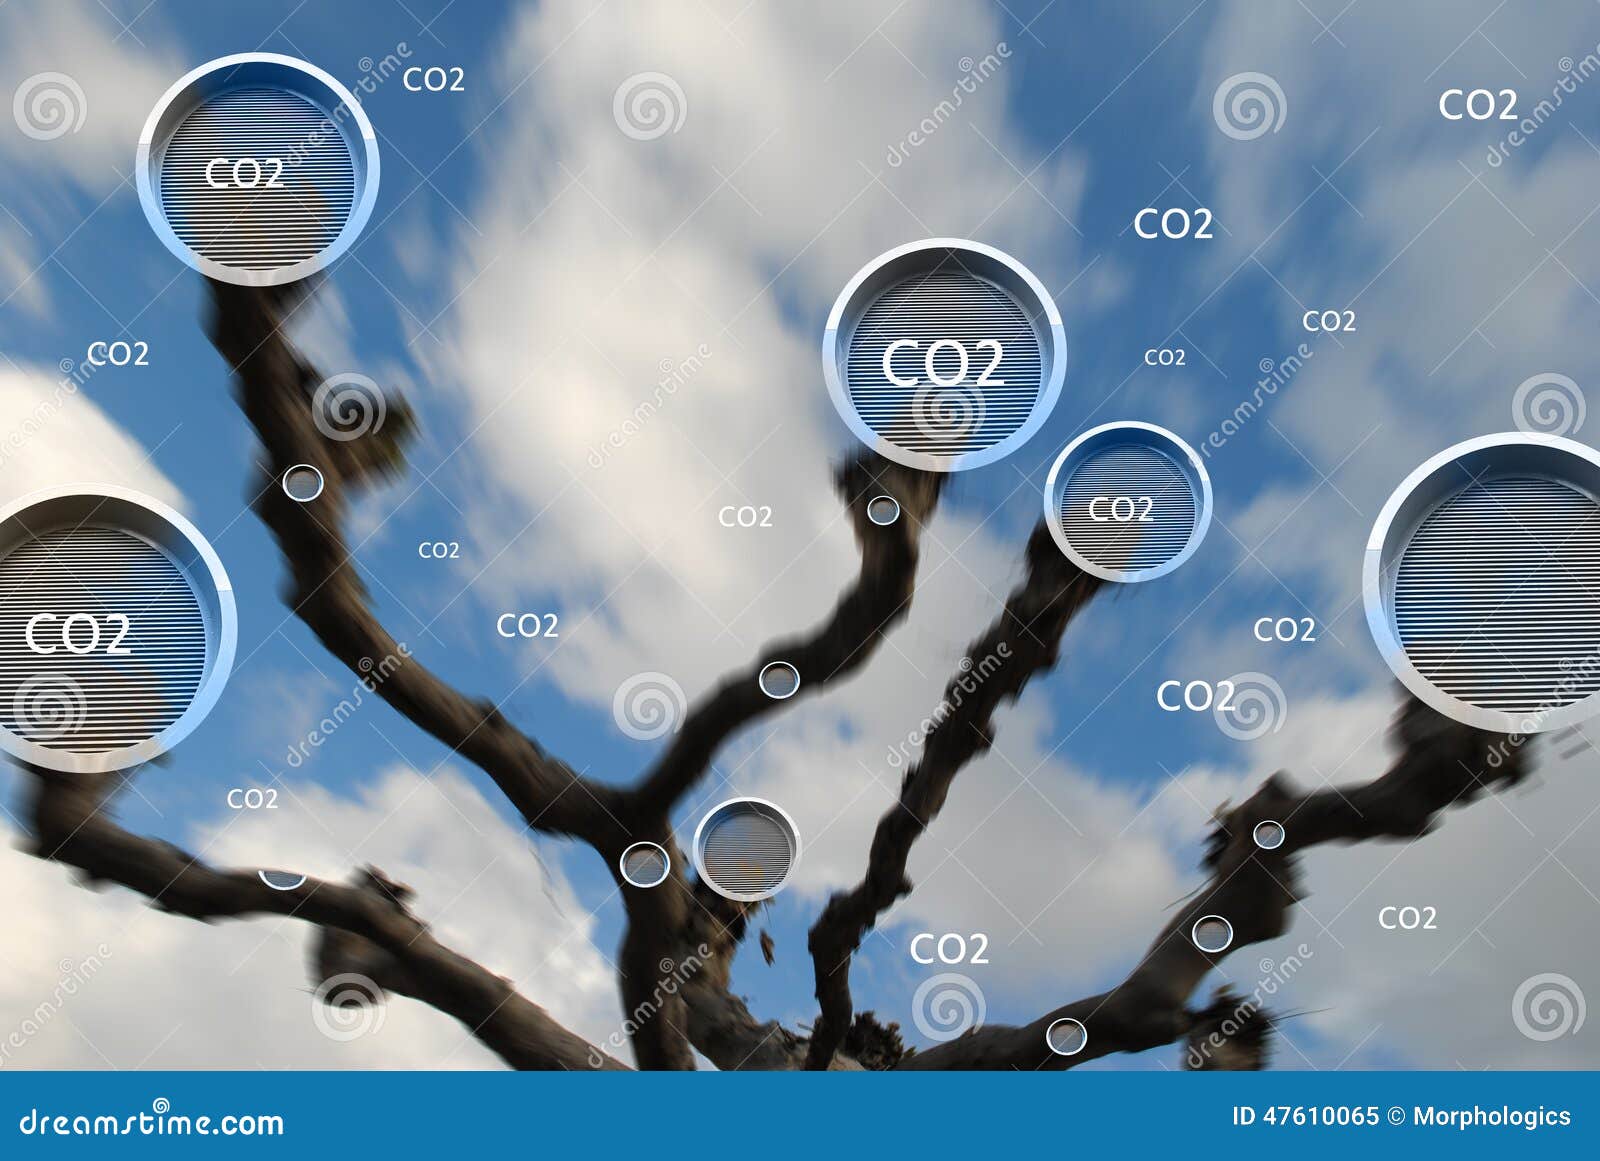 tree absorbing carbon dioxide concept